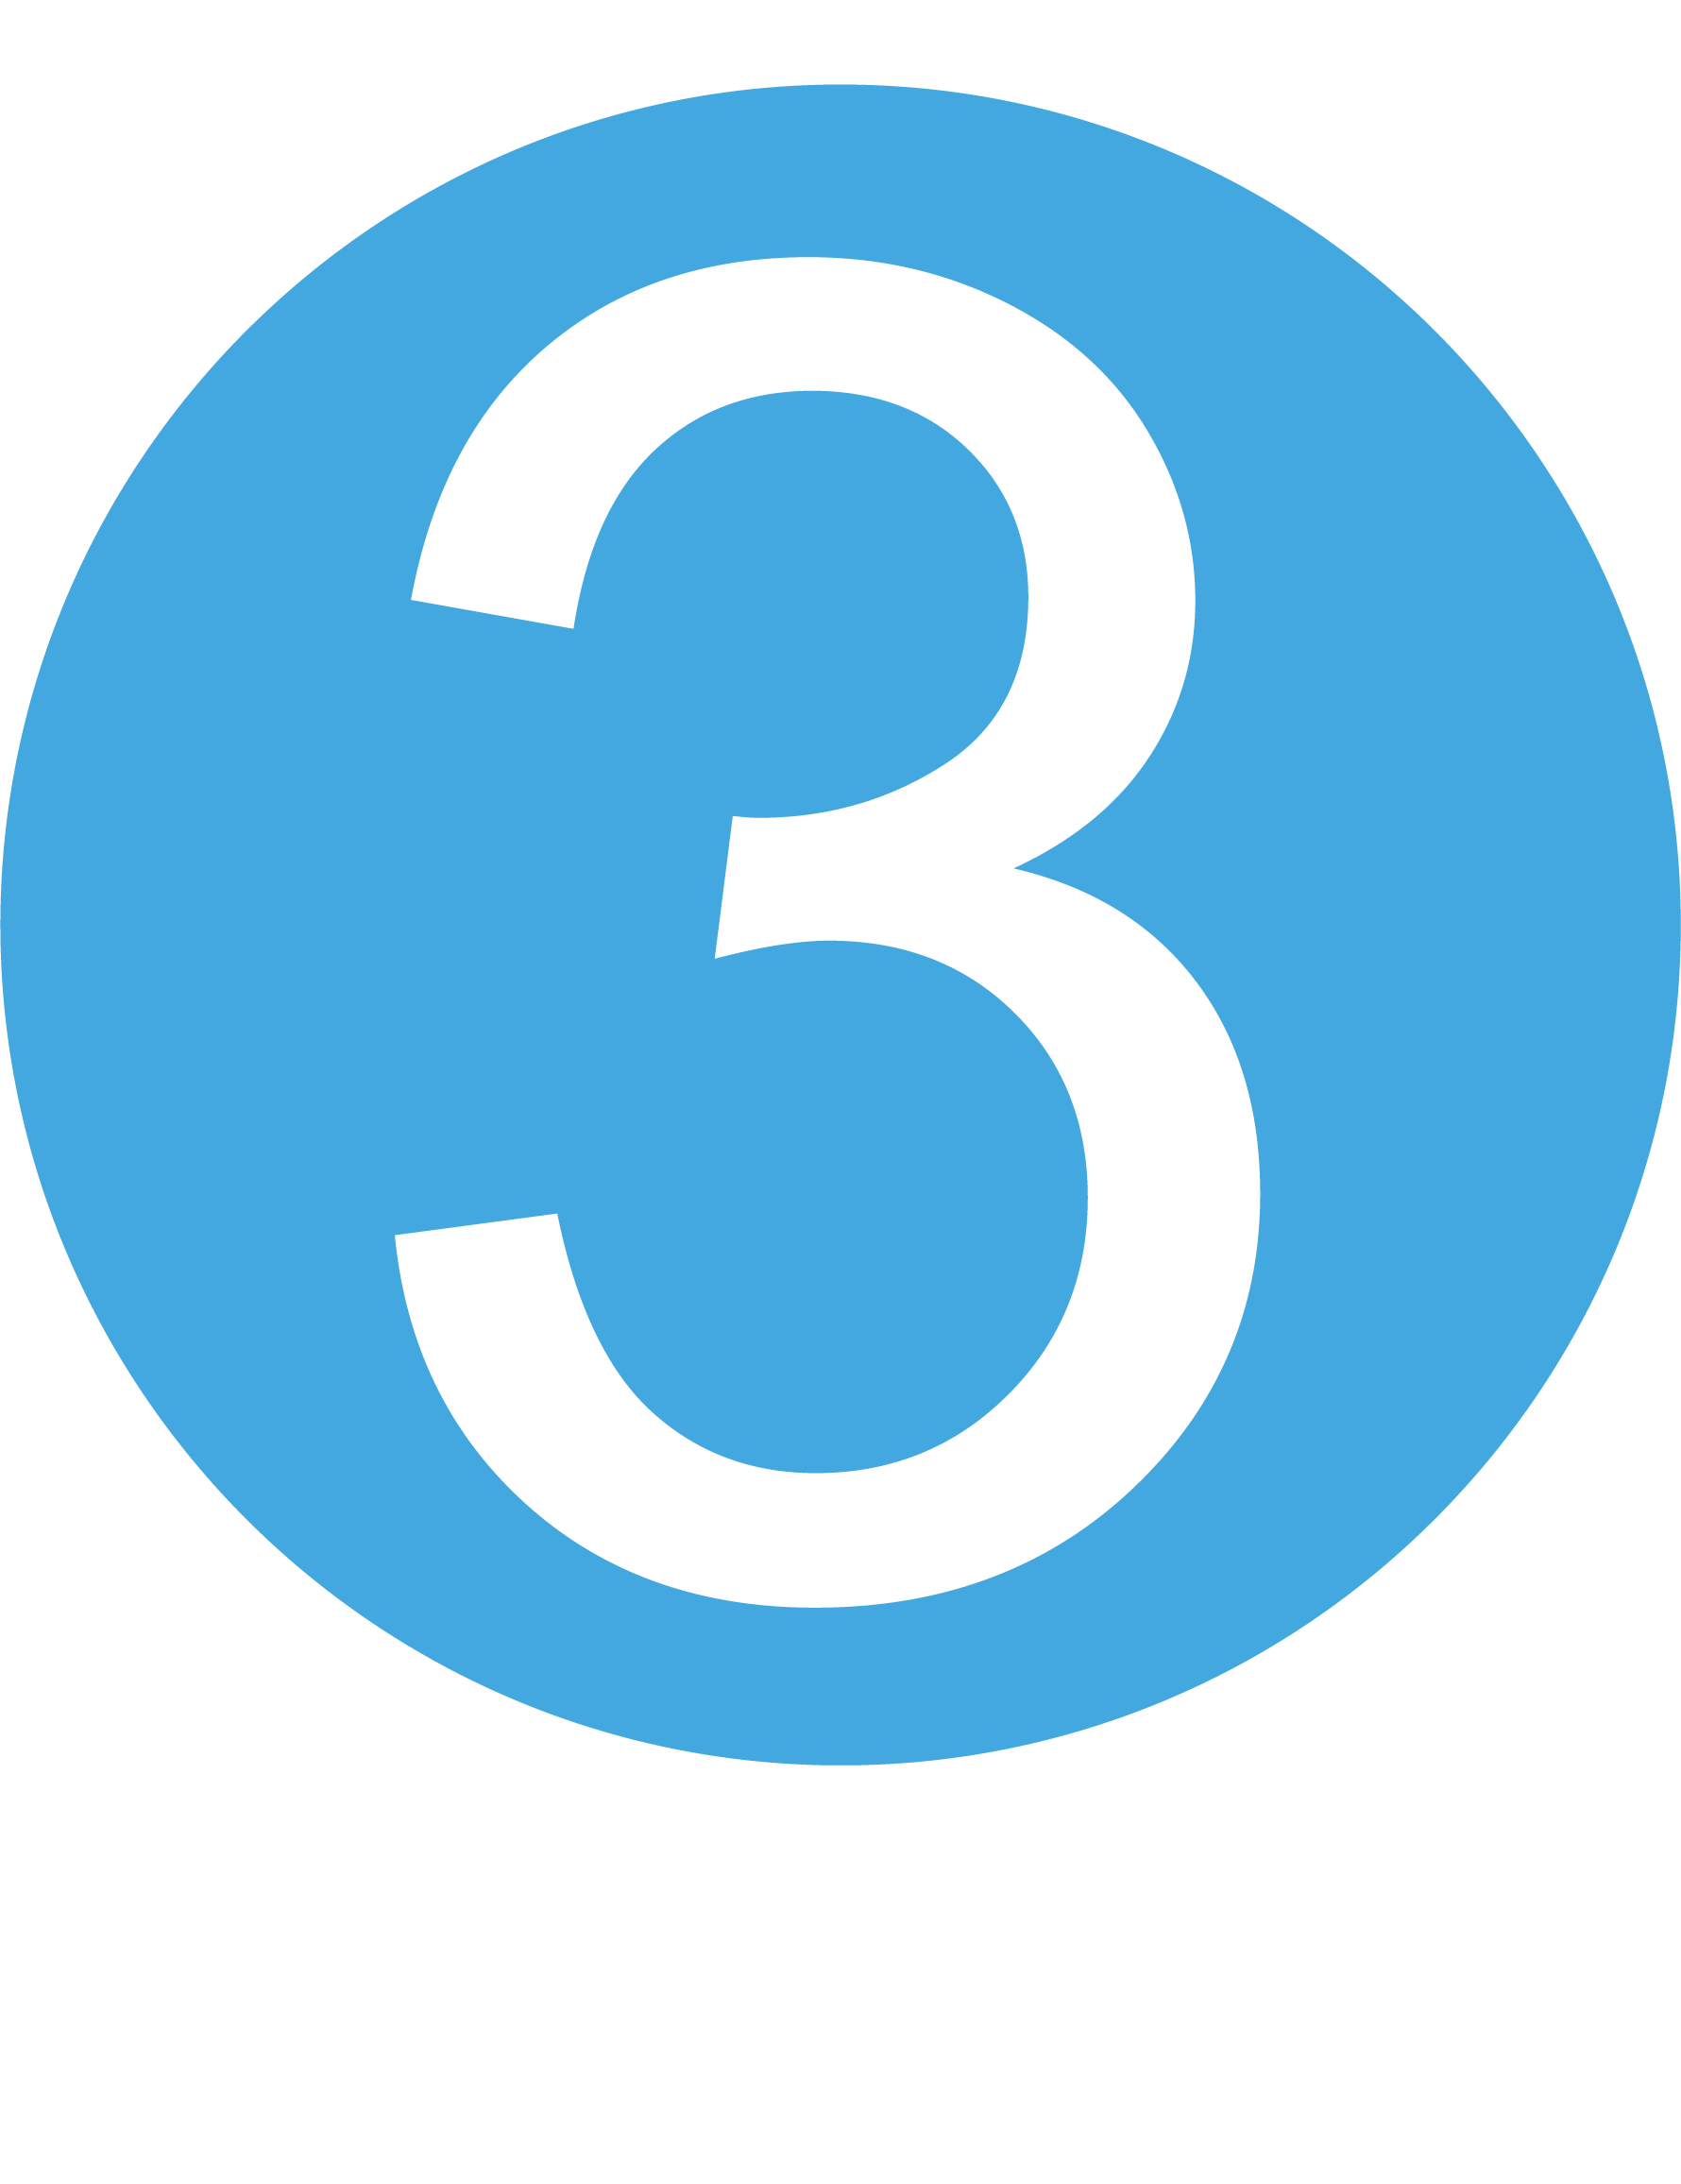 File:Eo circle blue white number-3.svg - Wikimedia Commons